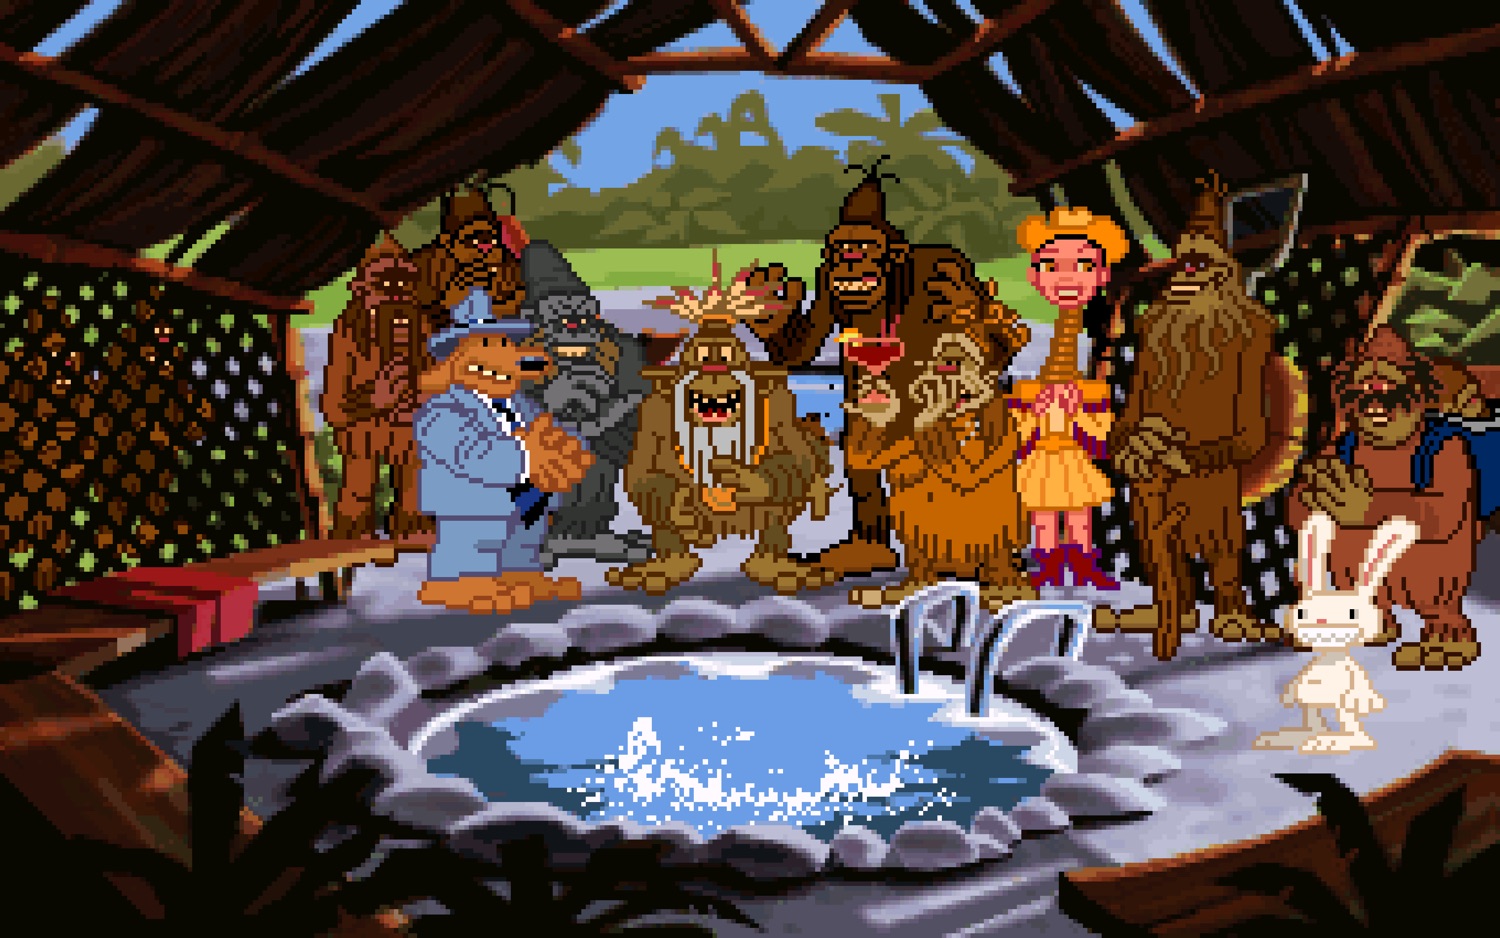 Screenshot of Sam and Max and a large group of Sasquatch standing around a hot tub (which has now been converted into a cauldron)